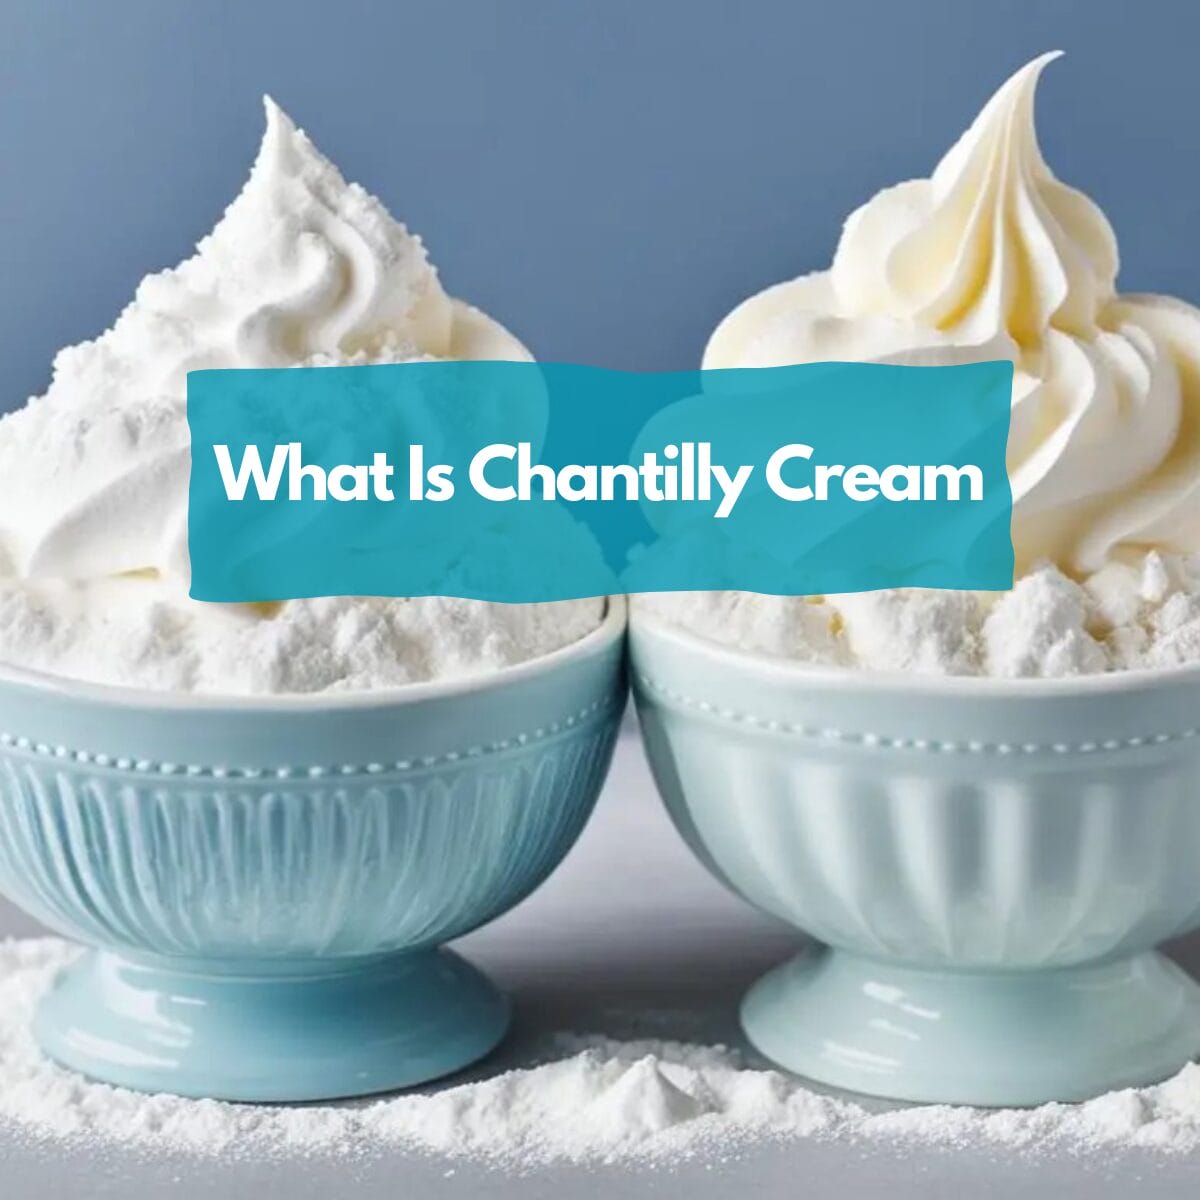 What is Chantilly cream